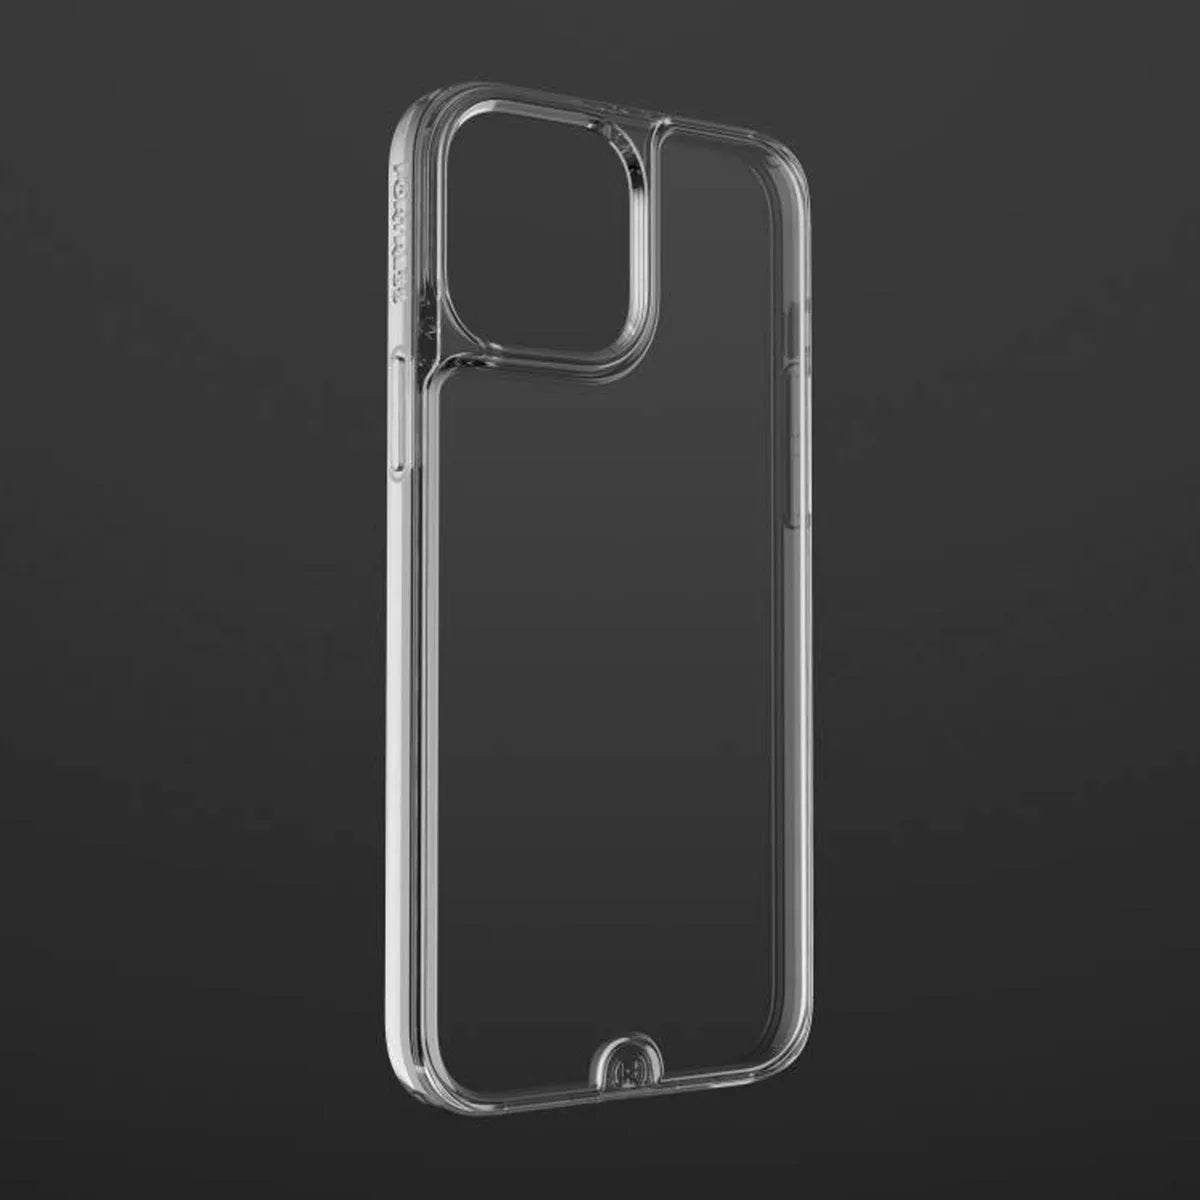 Fortress Fortress Fortress Infinite Glass Case for iPhone 13 Pro  Infinite Glass 